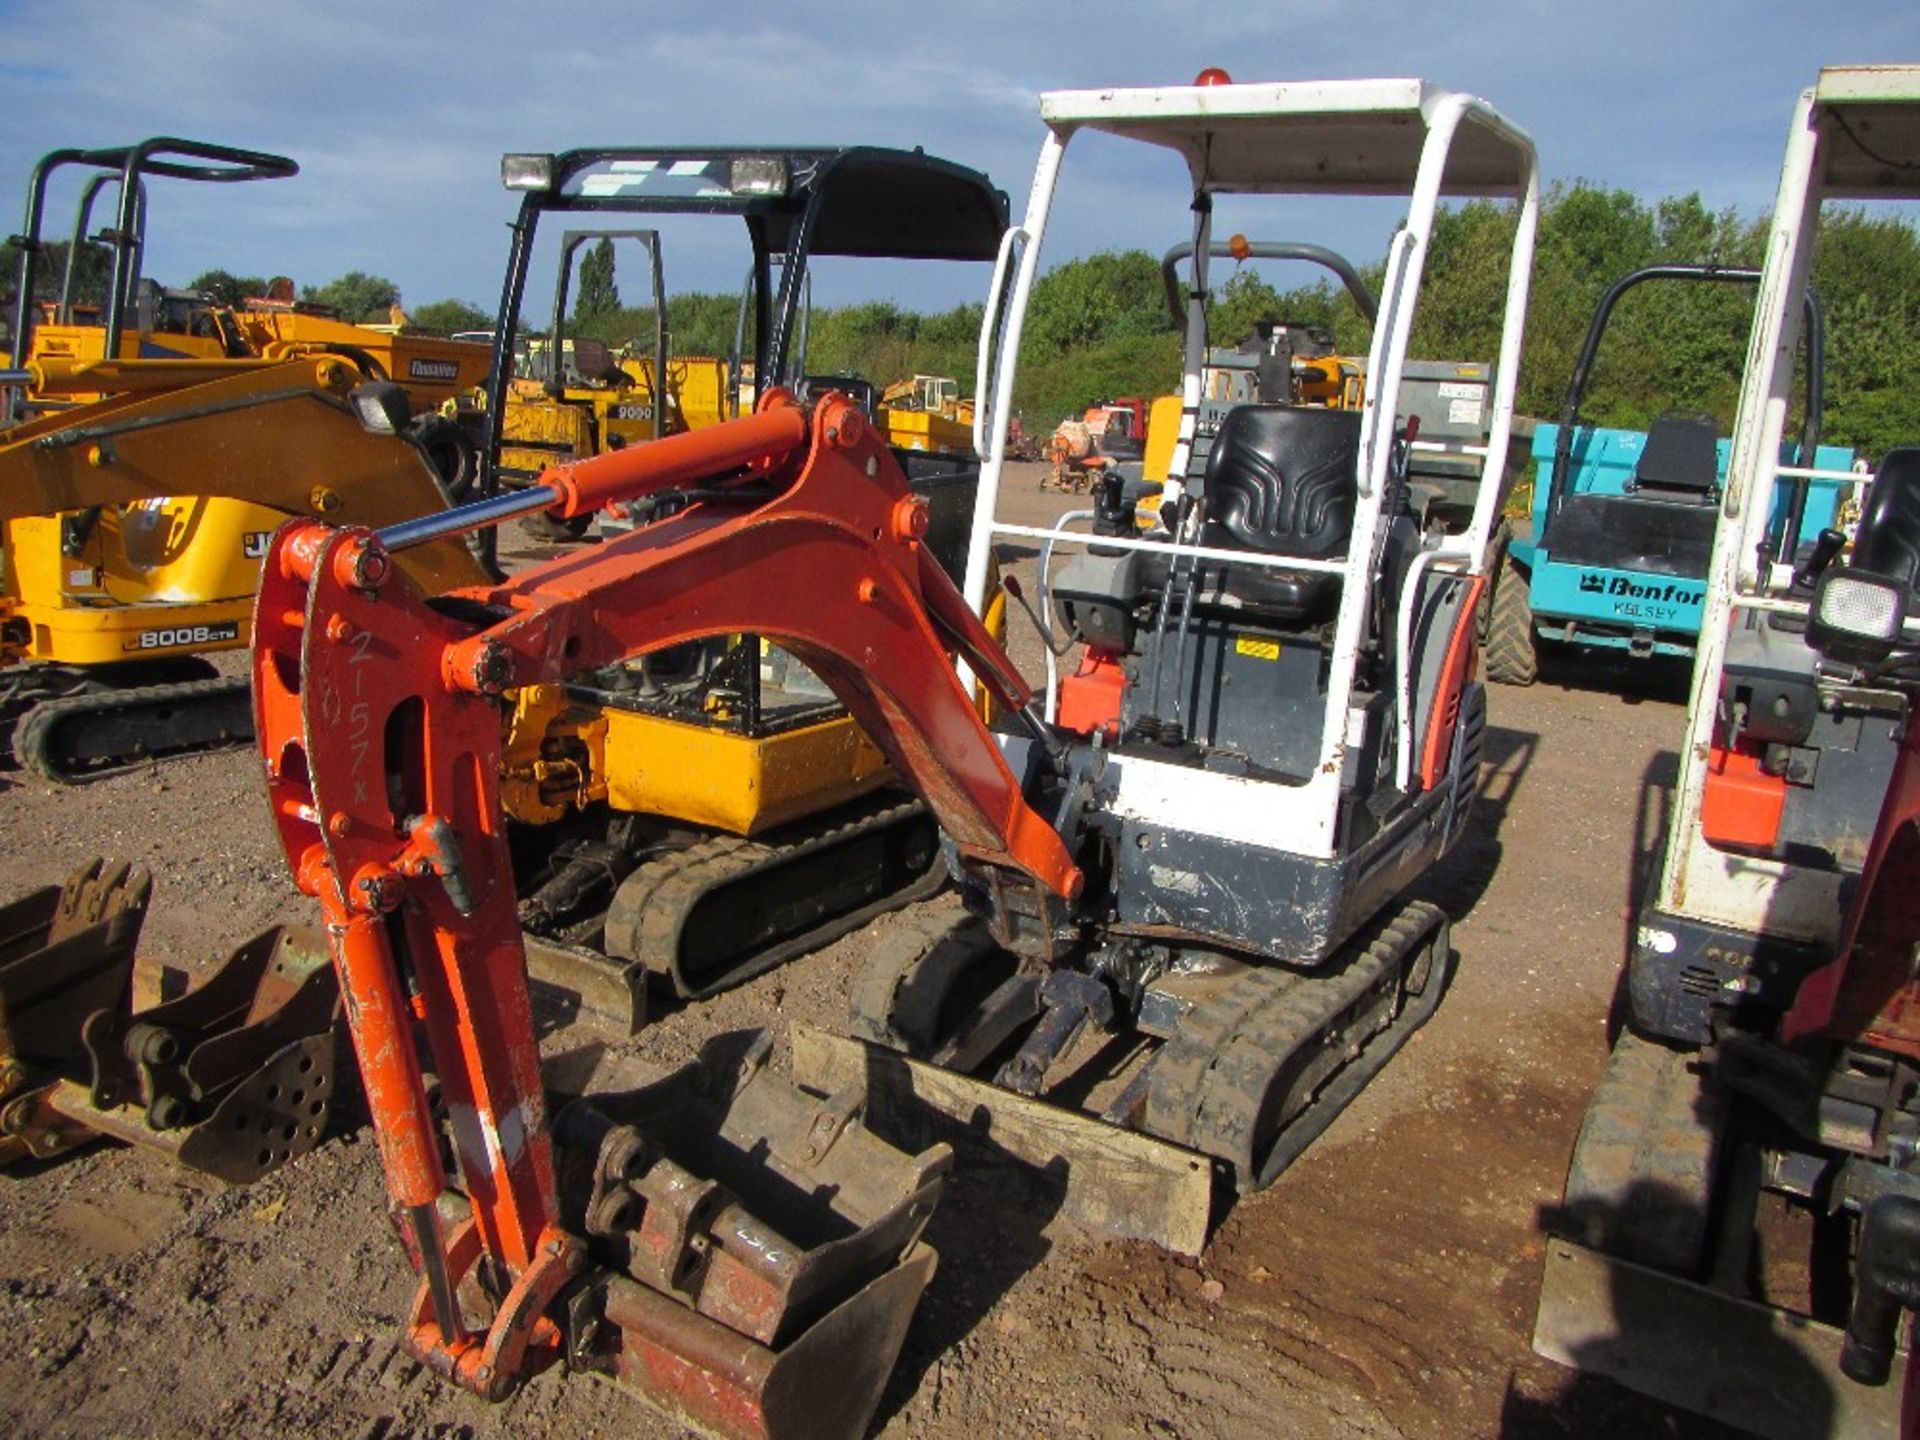 2006 Kubota KX36-3, with 3 Buckets, immobiliser fitted red key will be supplied 3665 Hrs Ser No